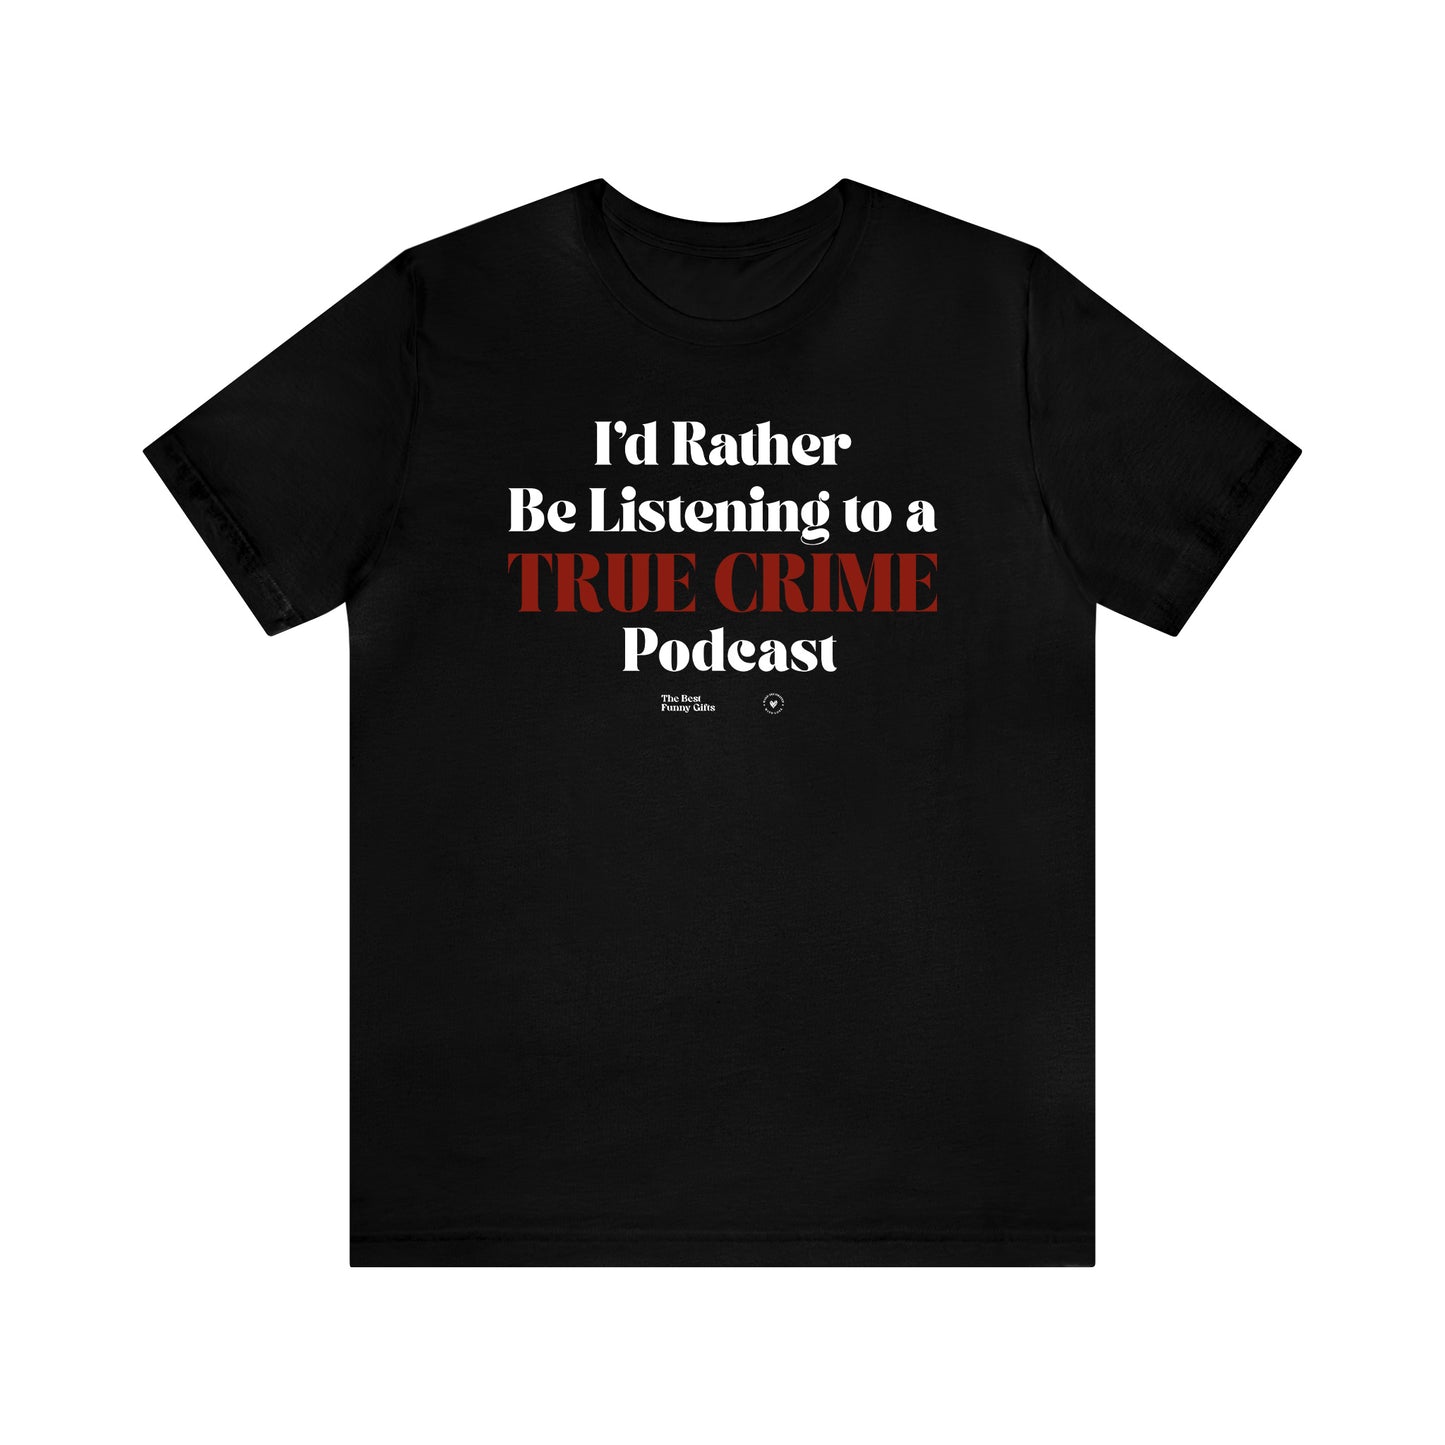 Funny Shirts for Women - I'd Rather Be Listening to a True Crime Podcast - Women’s T Shirts